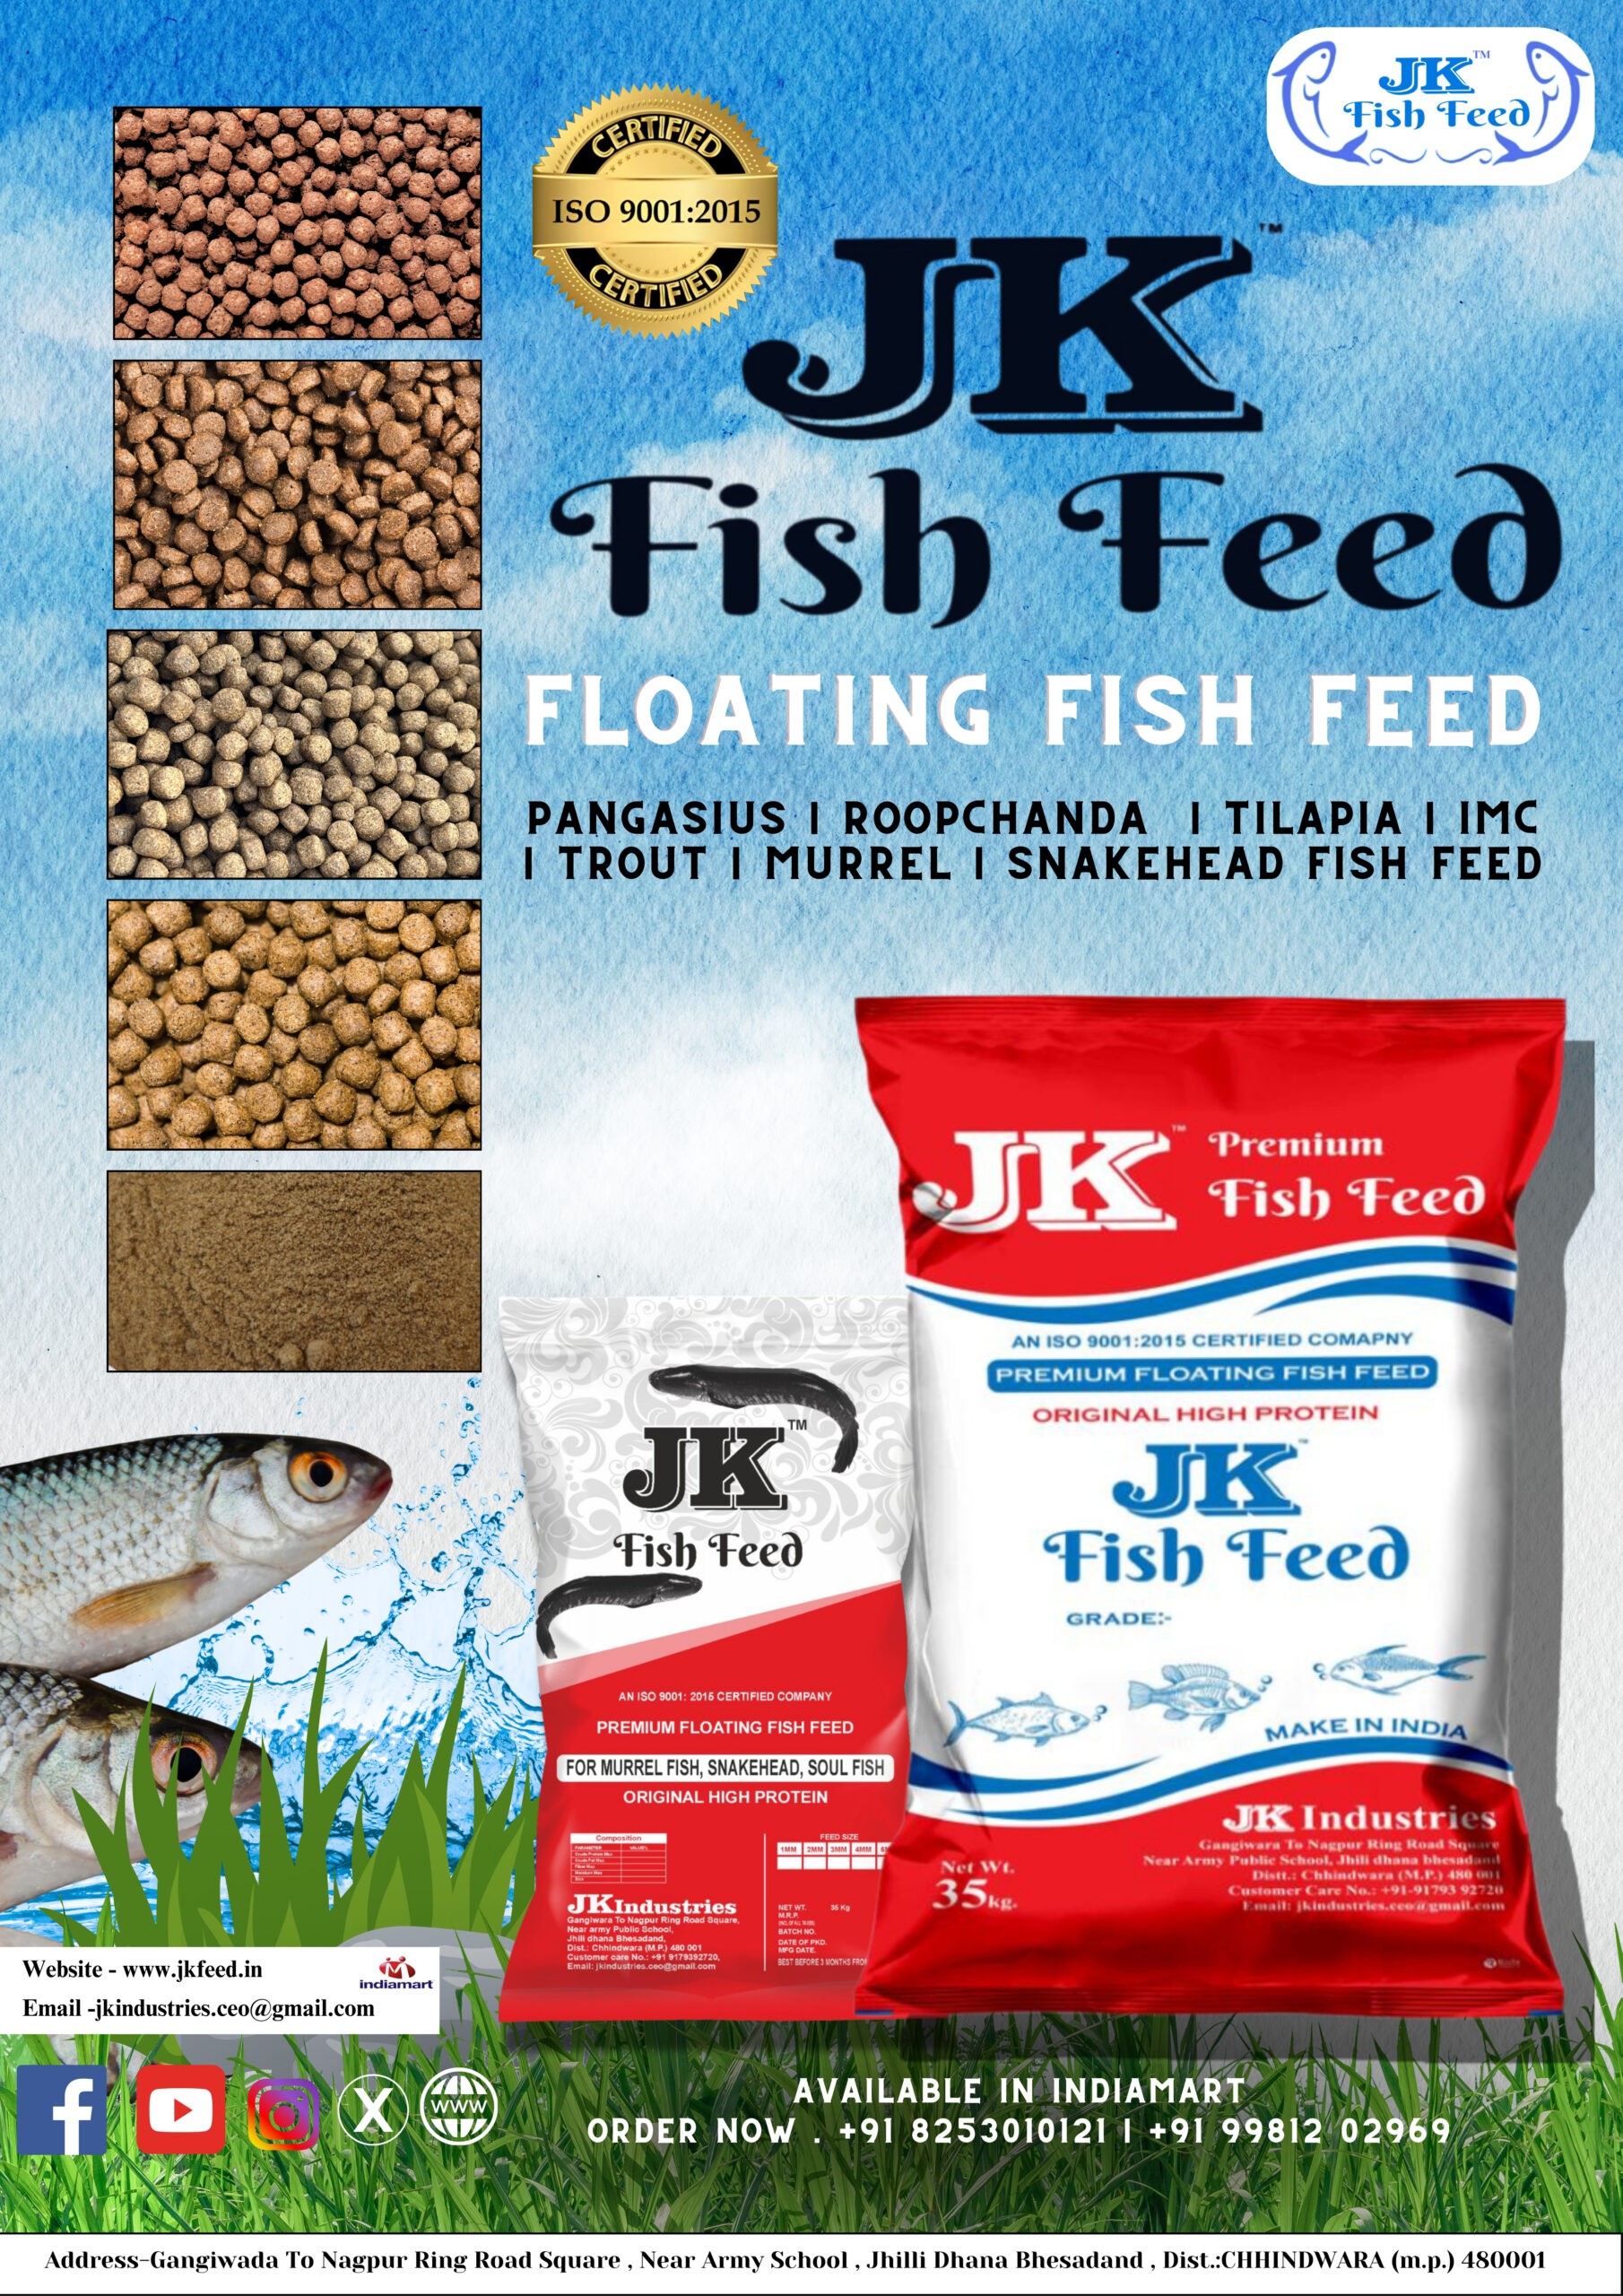 WELCOME TO - JK FISH FEEDS AND CATTLE FEEDS